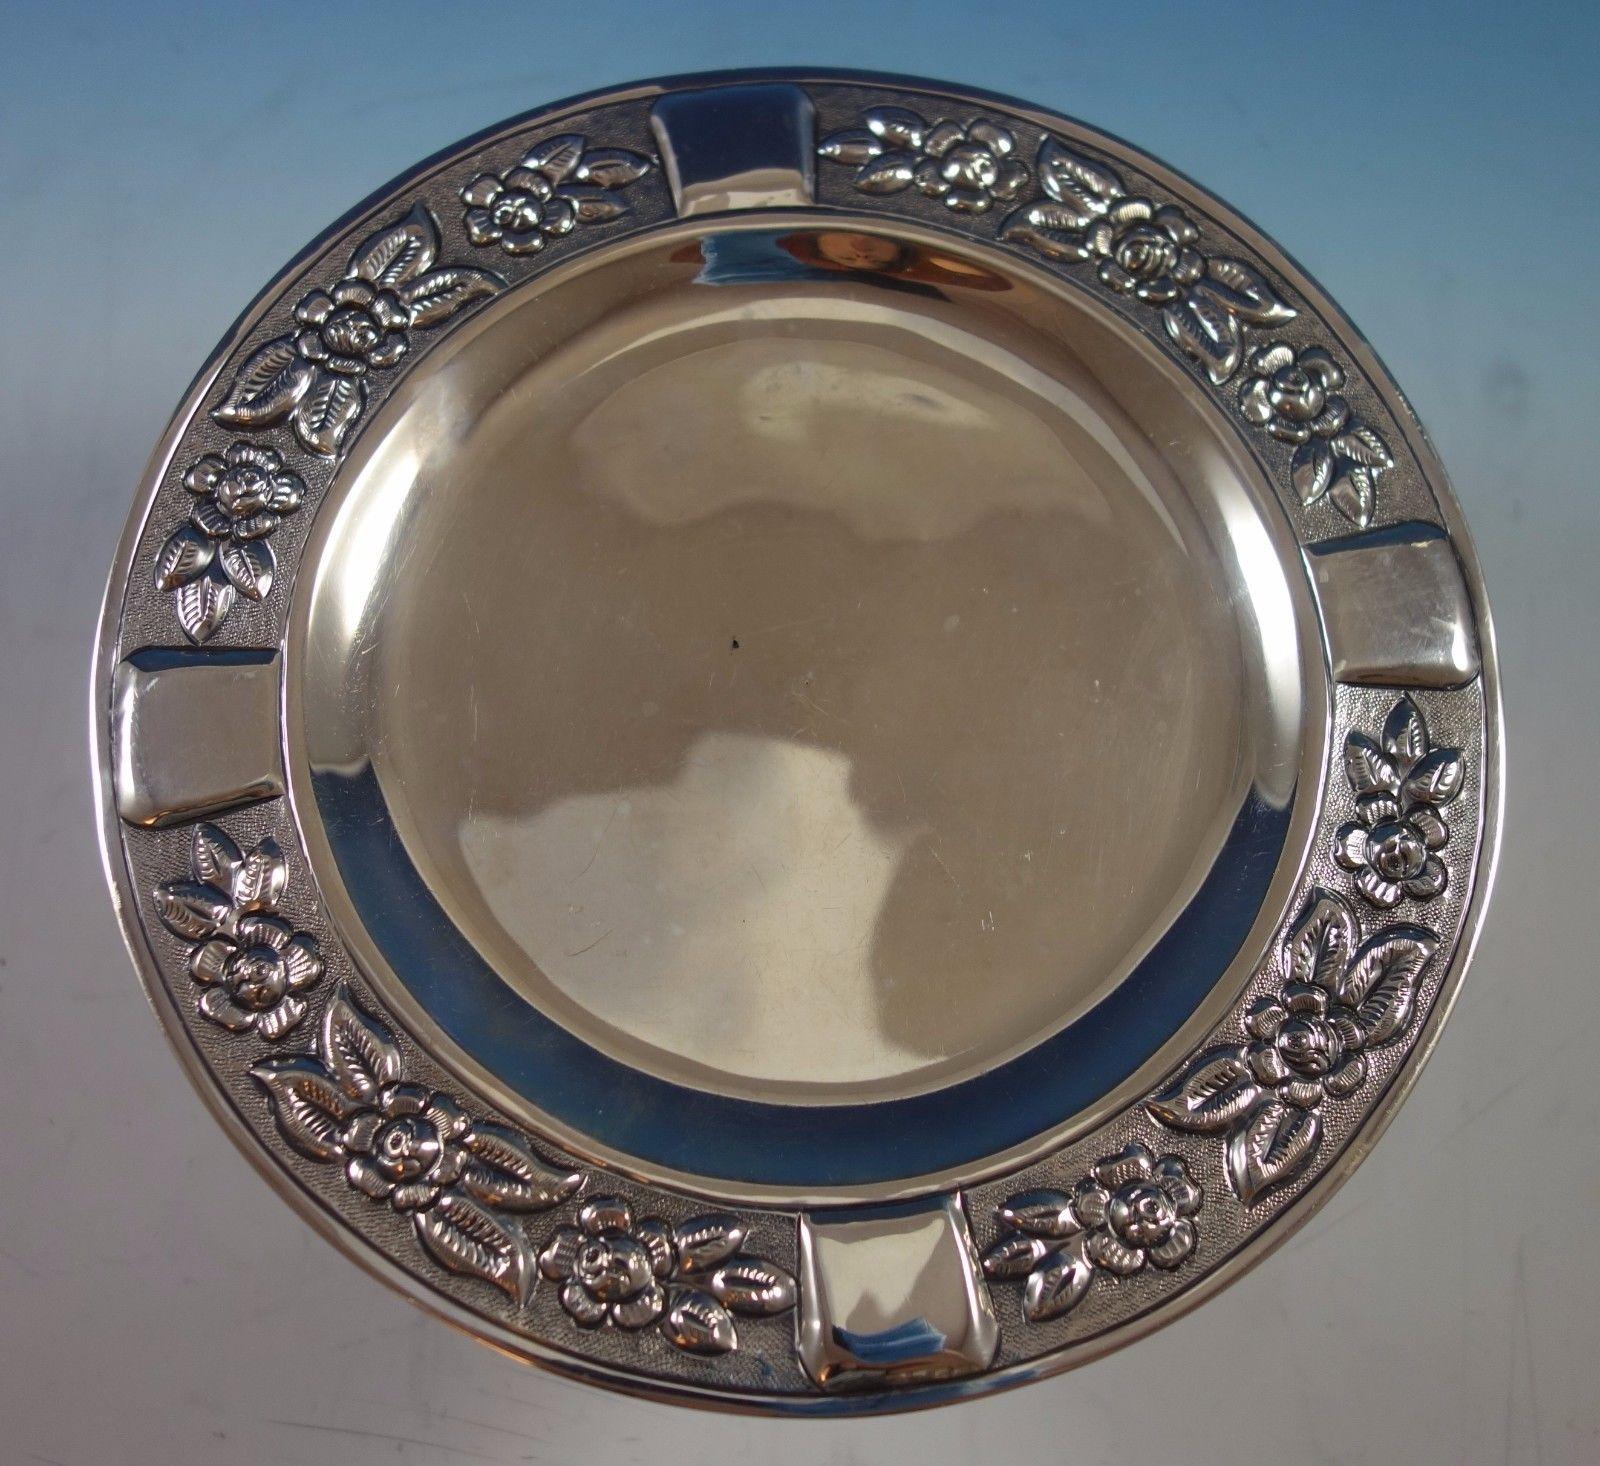 Aztec rose by Maciel Mexican sterling silver dessert plate. The piece is marked with #2310-7, it measures 1/4